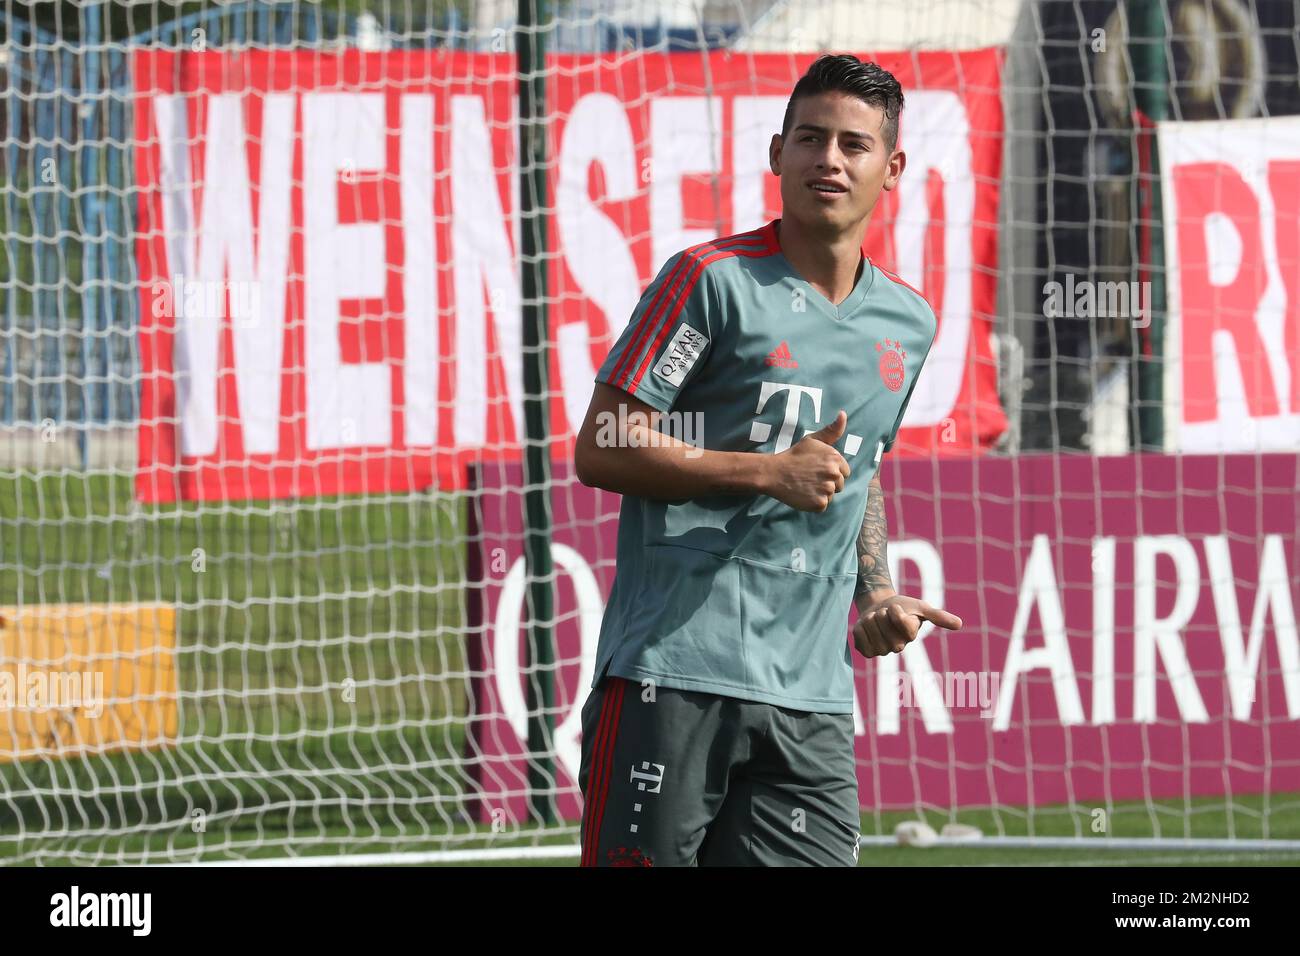 Bayern's James Rodriguez pictured during the winter training camp of German first division soccer team FC Bayern Munich, in Qatar, Tuesday 08 January 2019. BELGA PHOTO BRUNO FAHY Stock Photo